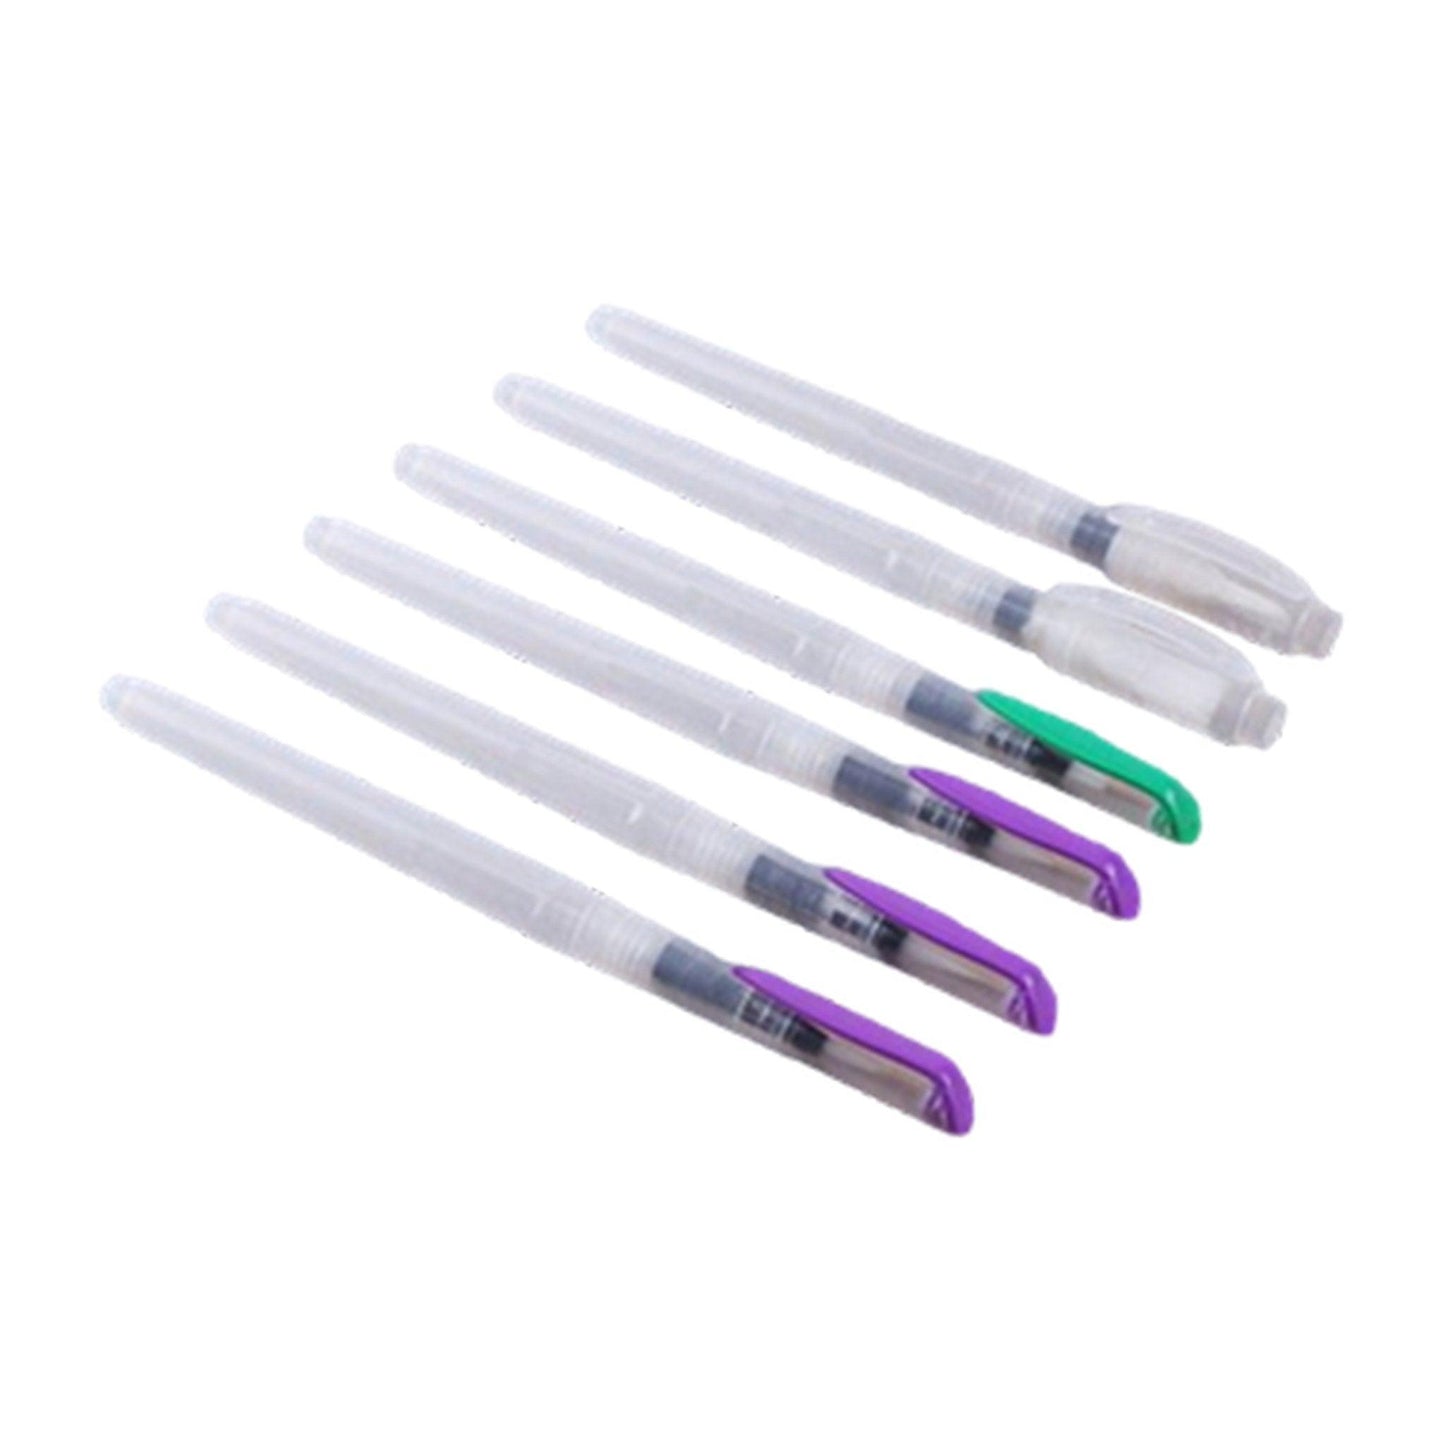 Multi-specification Fountain Pen Set Optional Special For Painting and Drawing Watercolor Pen Writing Brush Practice Calligraphy Brush lettering Art NP-HTNQA-204 - CHL-STORE 